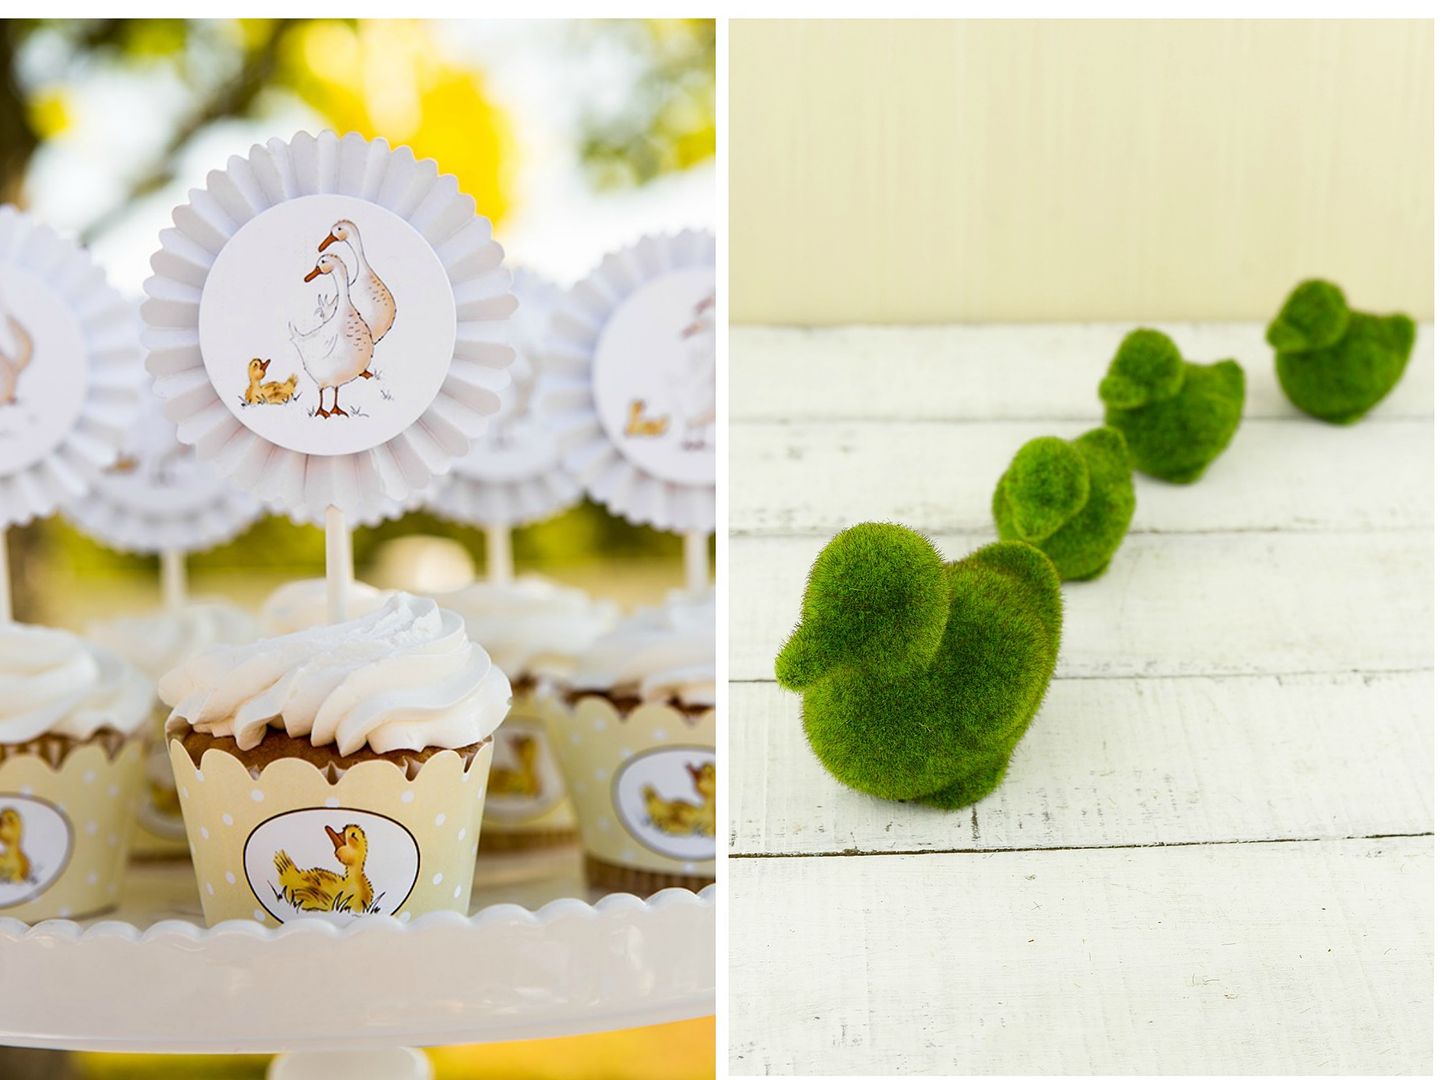 Make Way for Duckling birthday party ideas from Kate Aspen and Save on Crafts